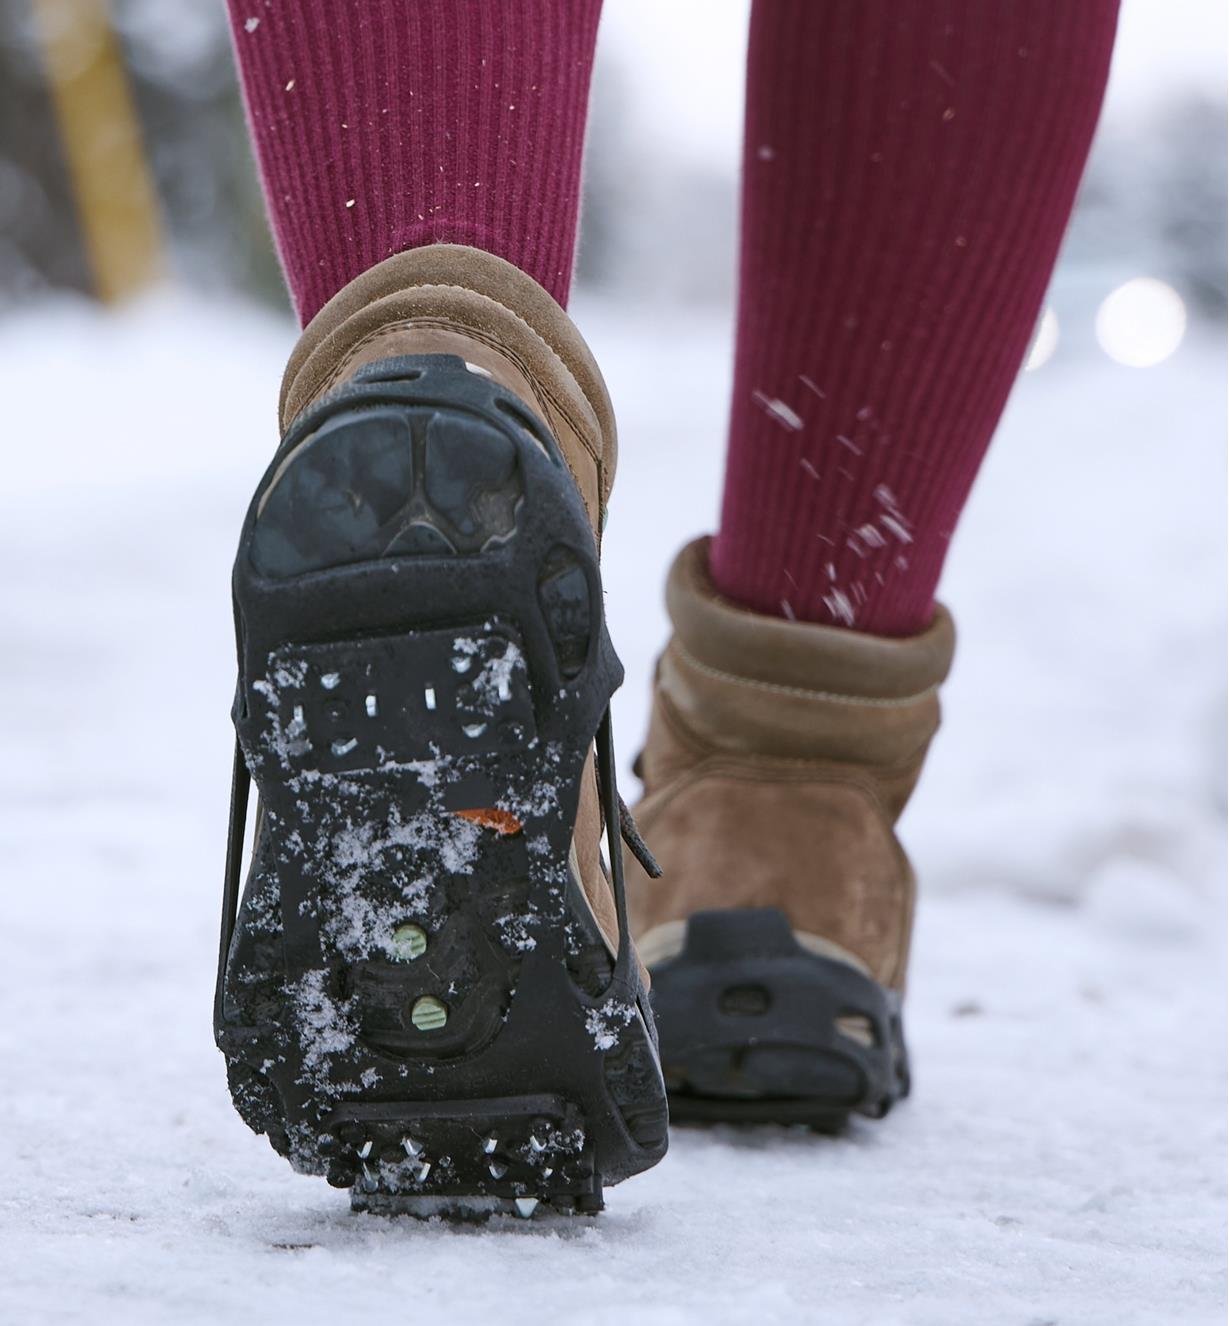 A person wears ice cleats over a pair of boots when walking over snowy ground